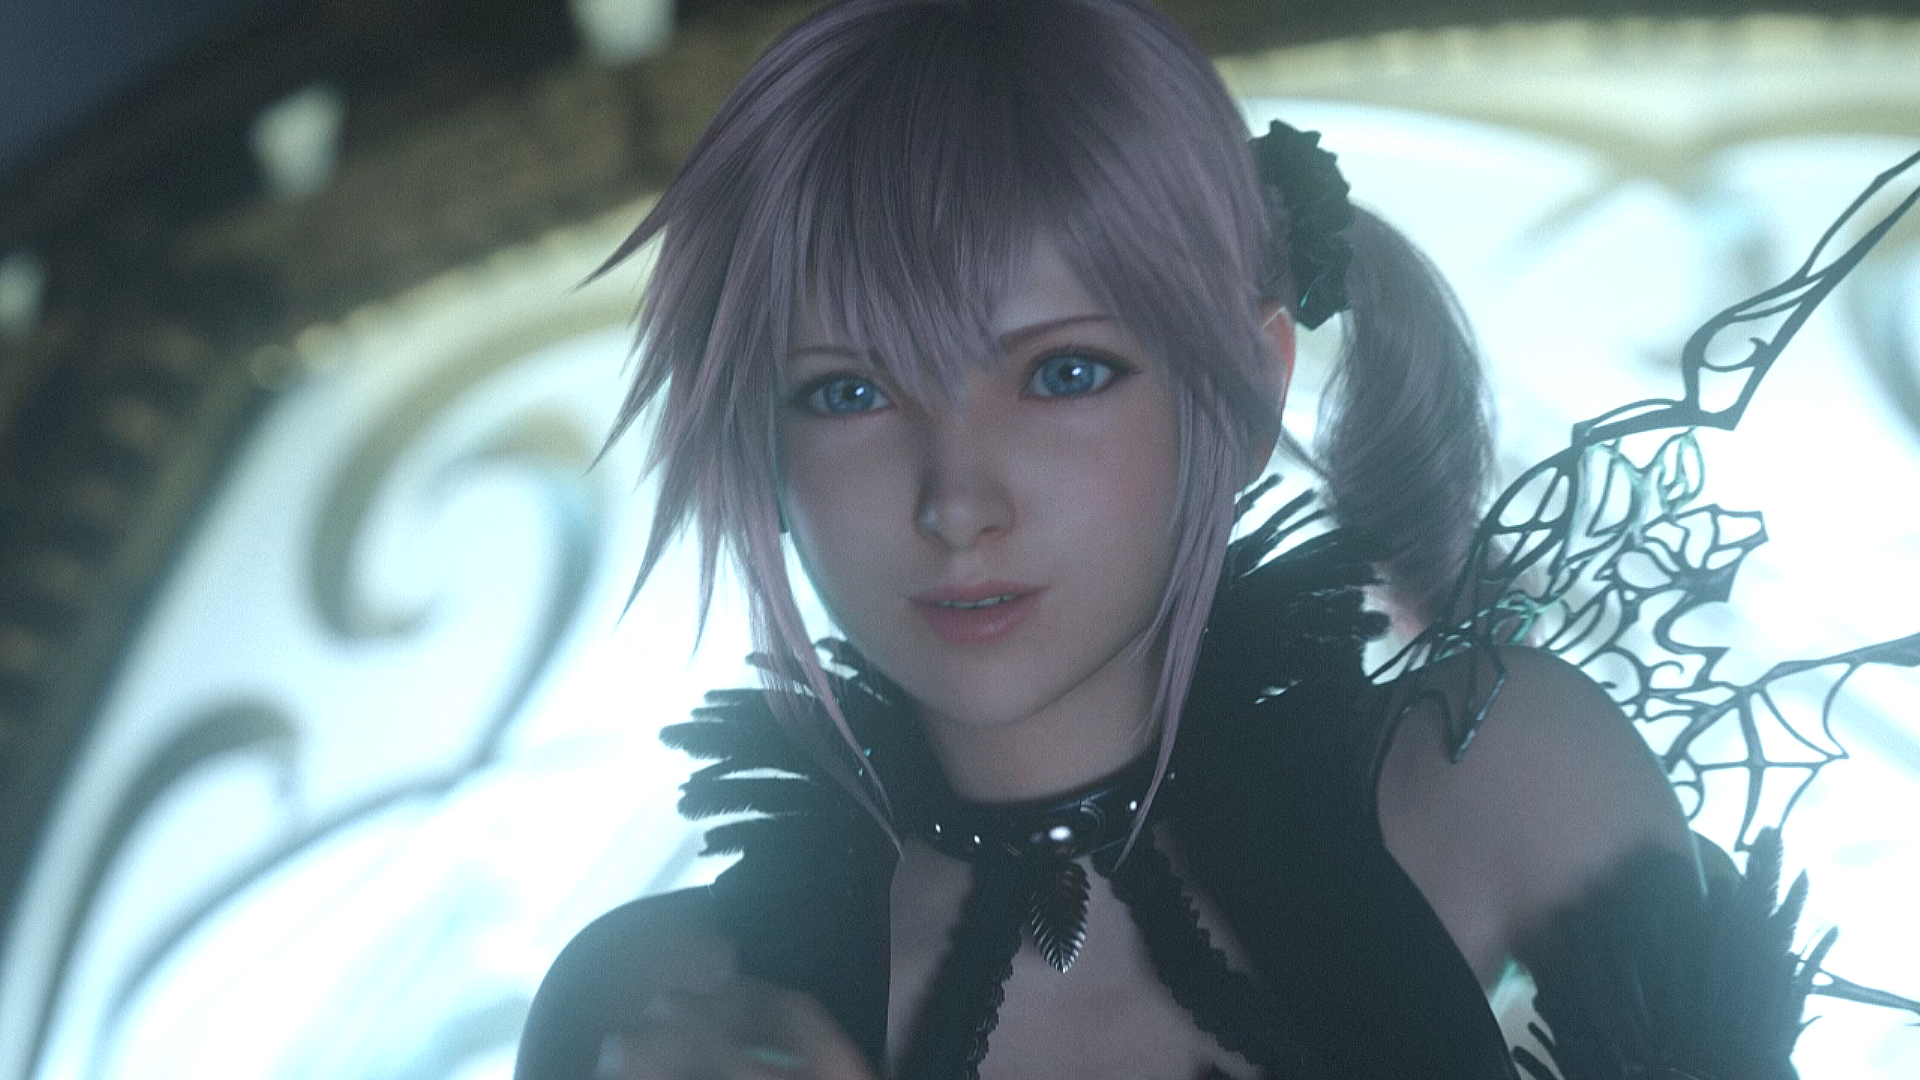 General 1920x1080 Final Fantasy XIII Final Fantasy blue eyes blonde pink hair ponytail choker black clothing black dress feathers women video game characters video games Square Enix Lumina gothic lolita noise